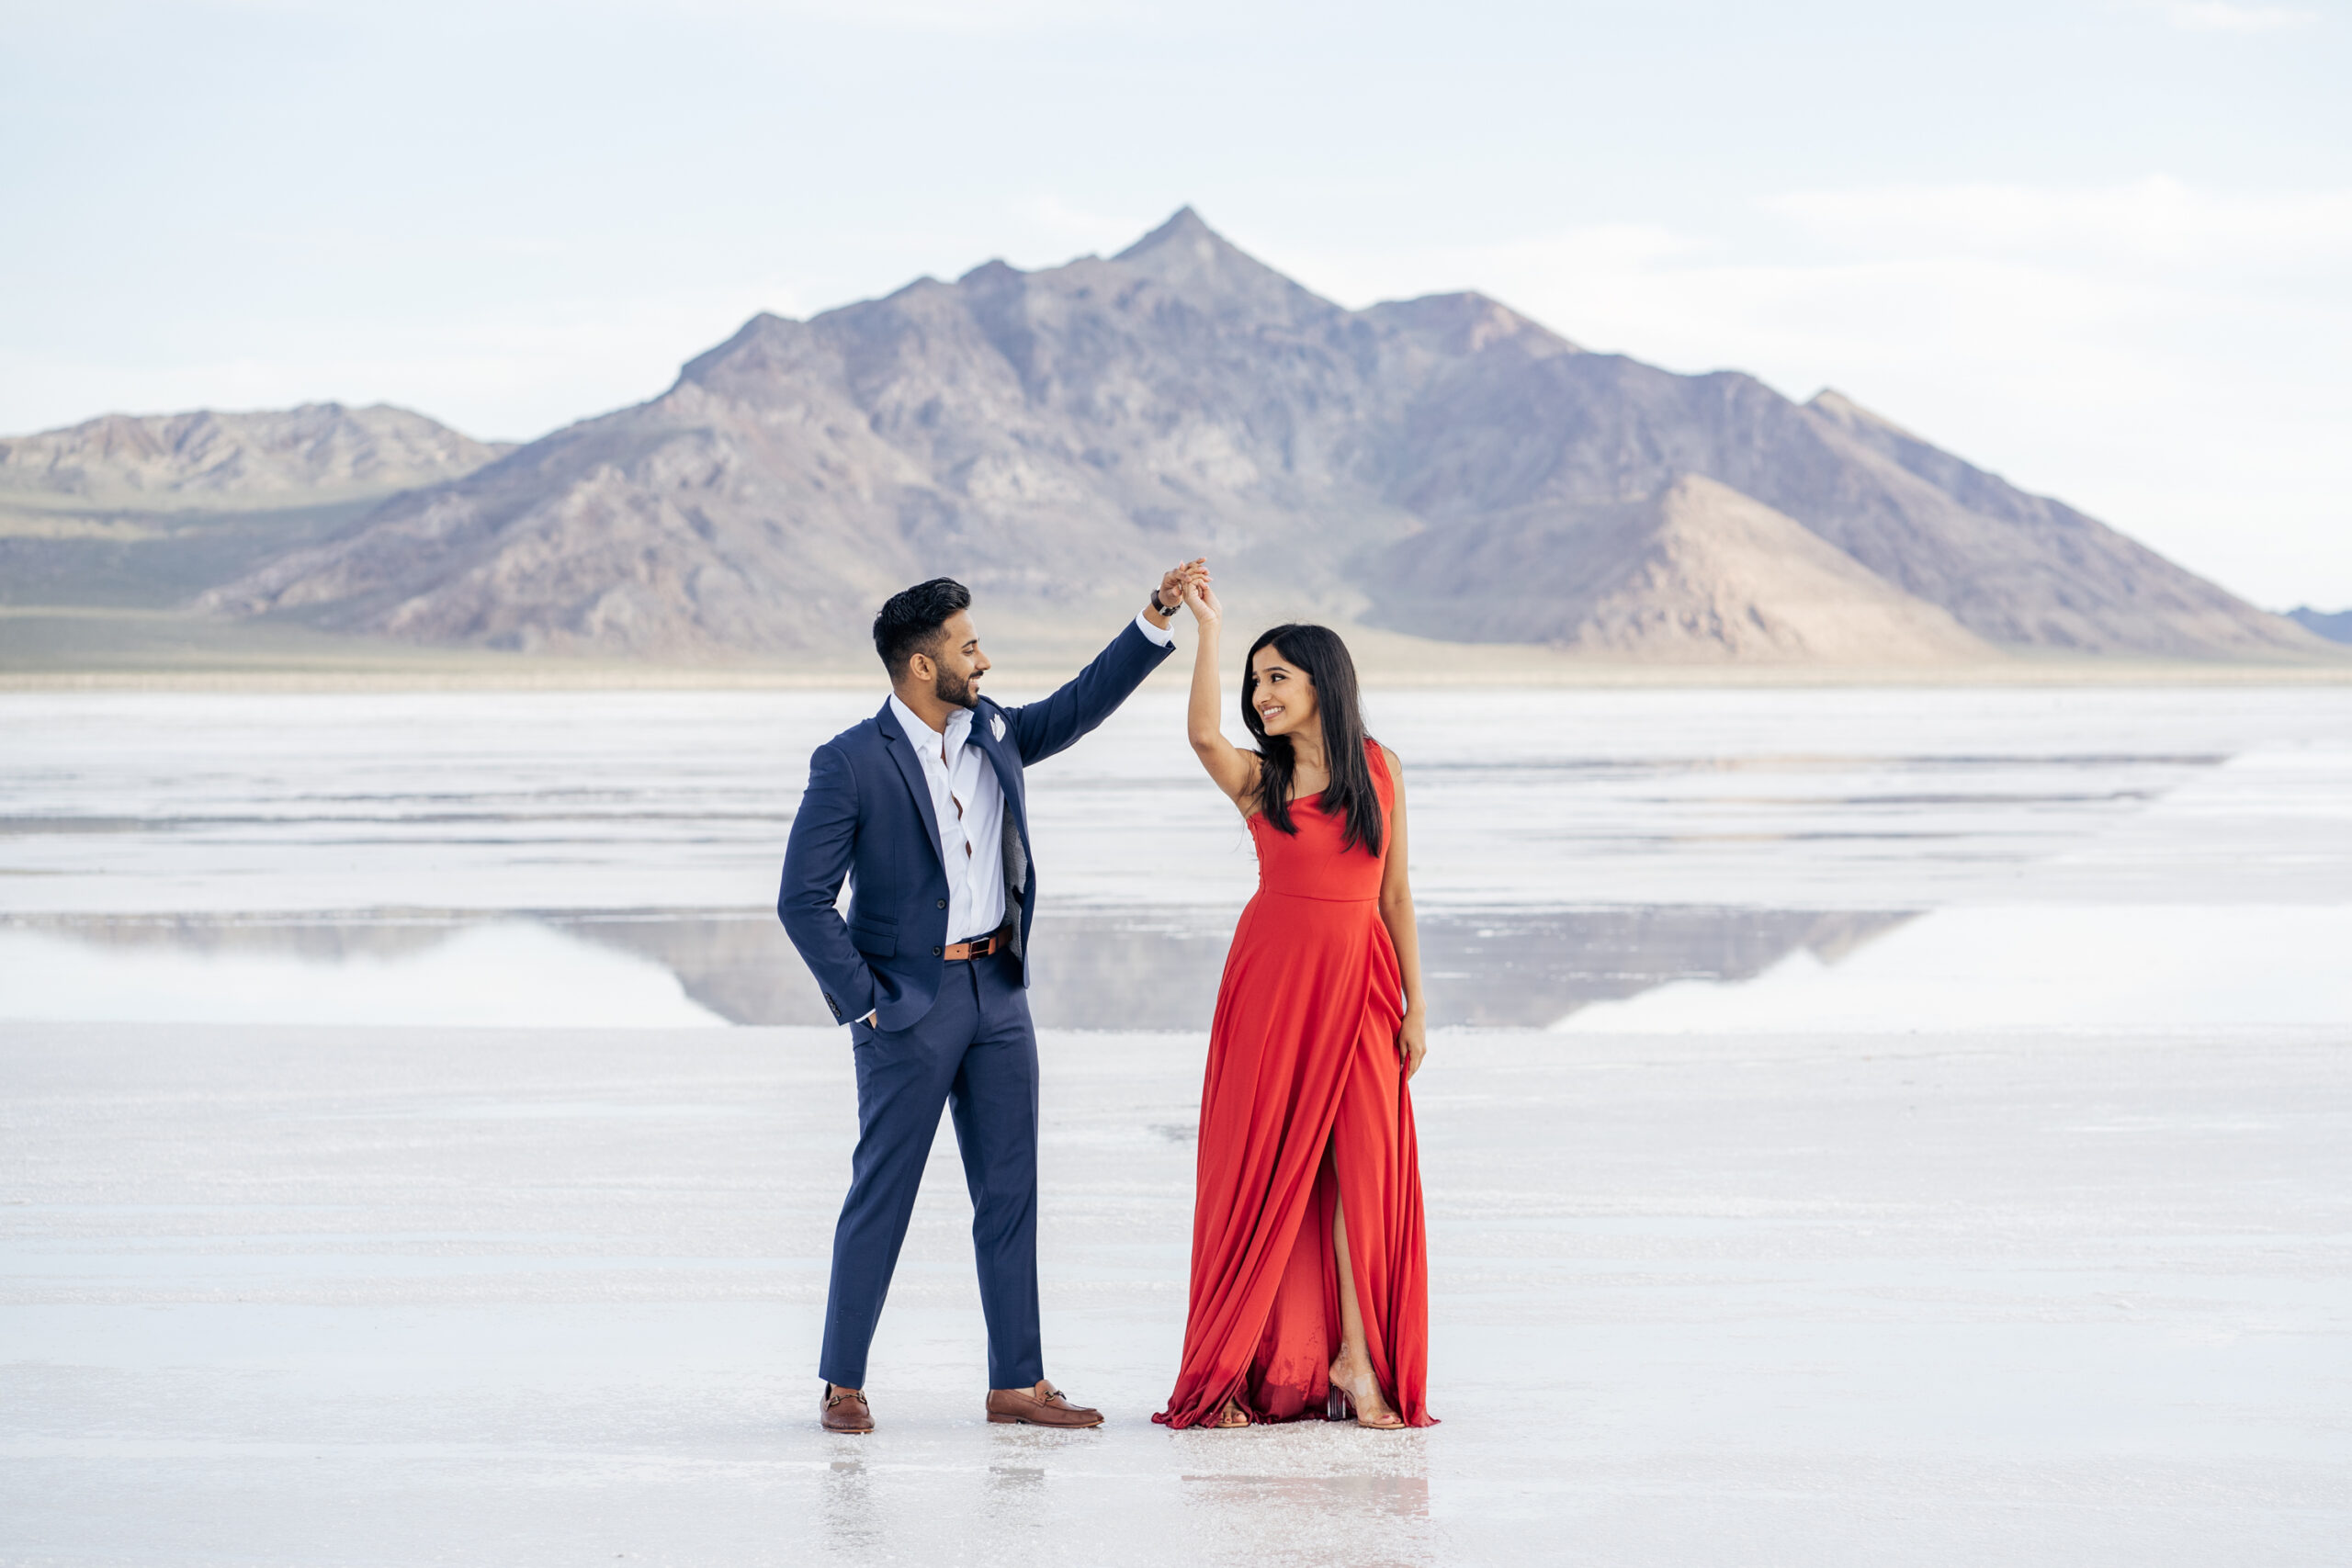 Engagement photos at the Bonneville Salt Flats with mountain in distance and water reflections on the ground.